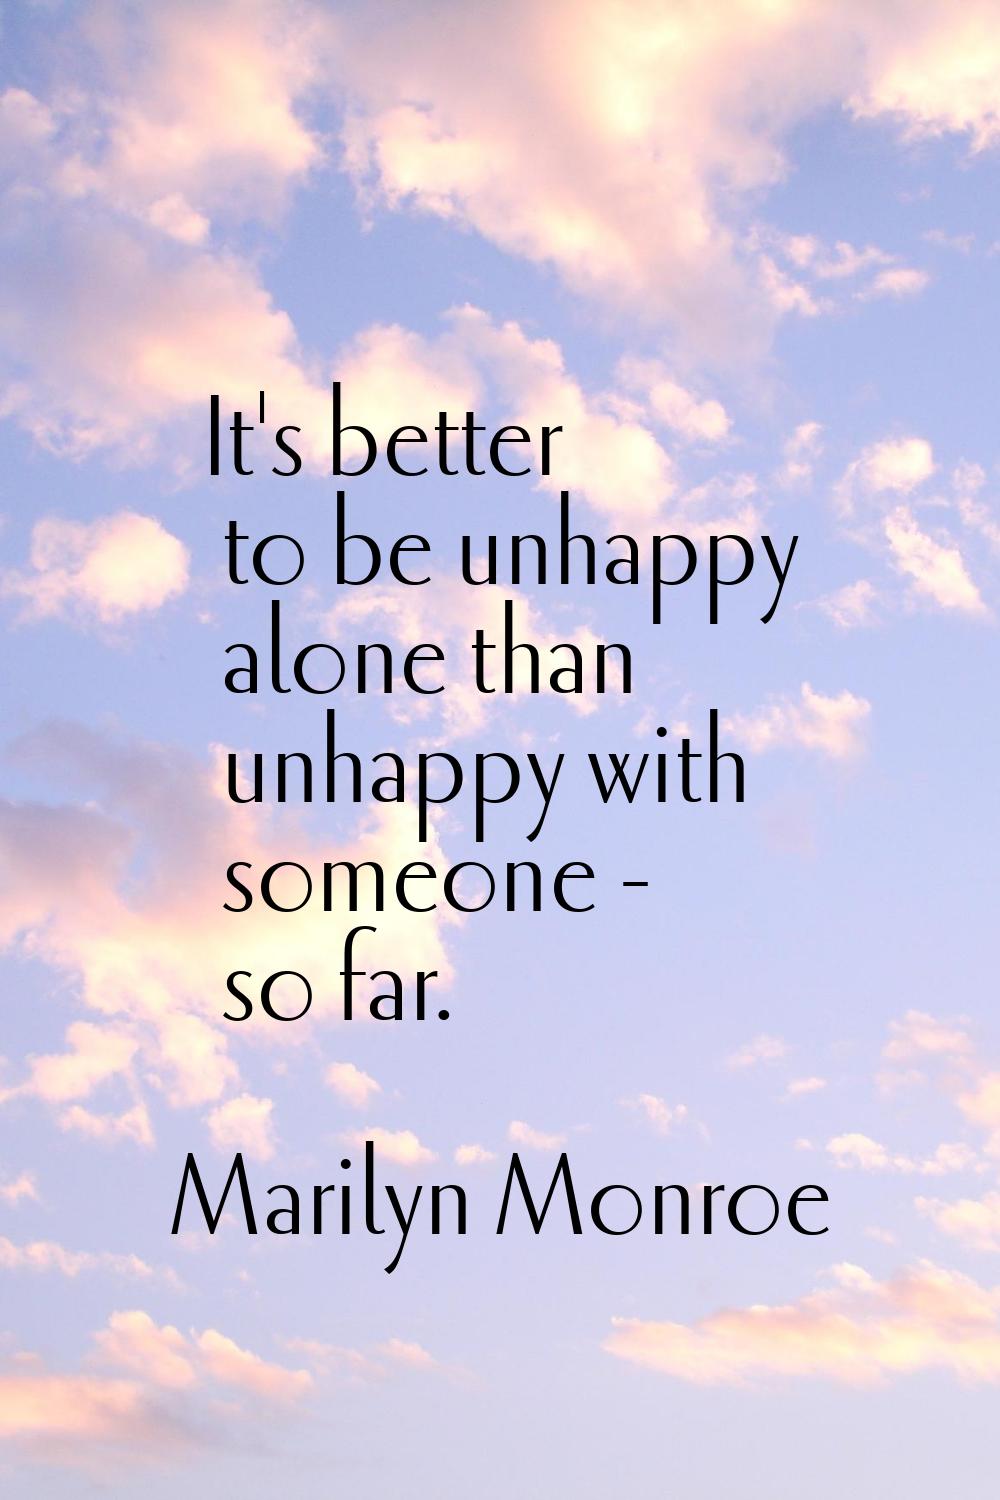 It's better to be unhappy alone than unhappy with someone - so far.